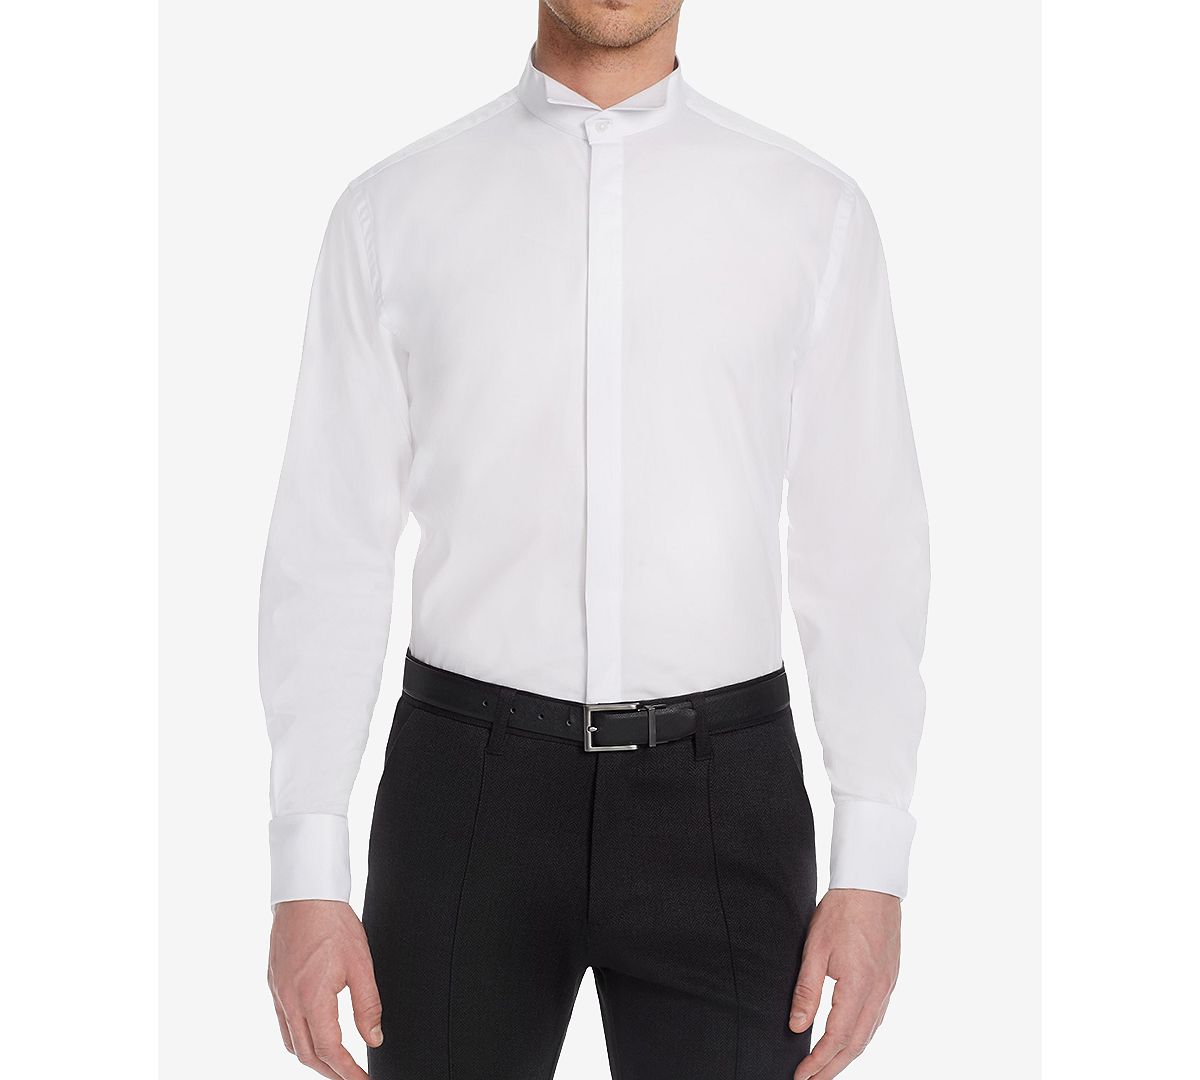 Michelsons Of London Classic/regular Fit Stretch Solid French Cuff Tuxedo Shirt White